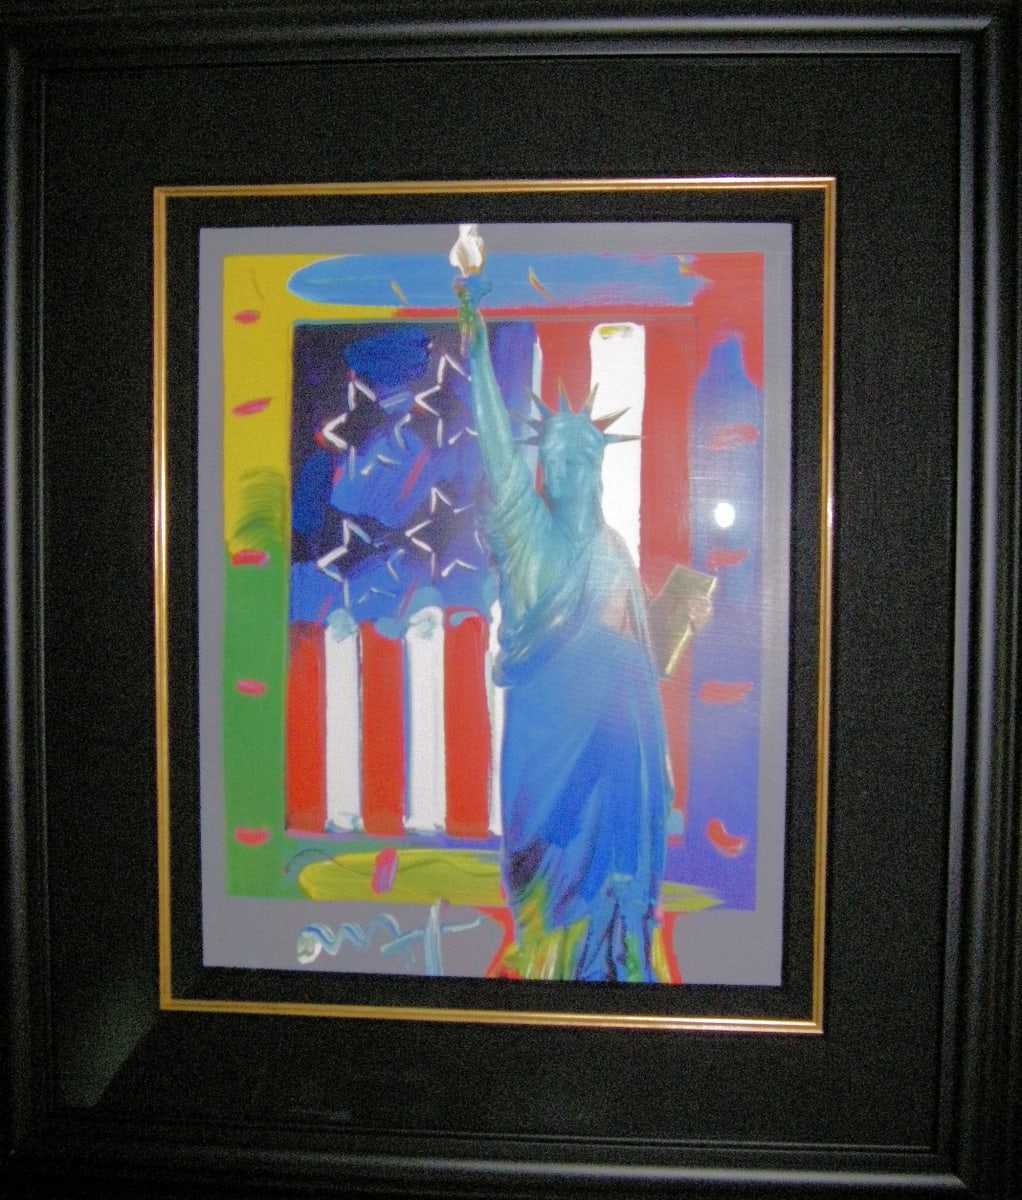 Full Liberty With Flag by Peter Max 